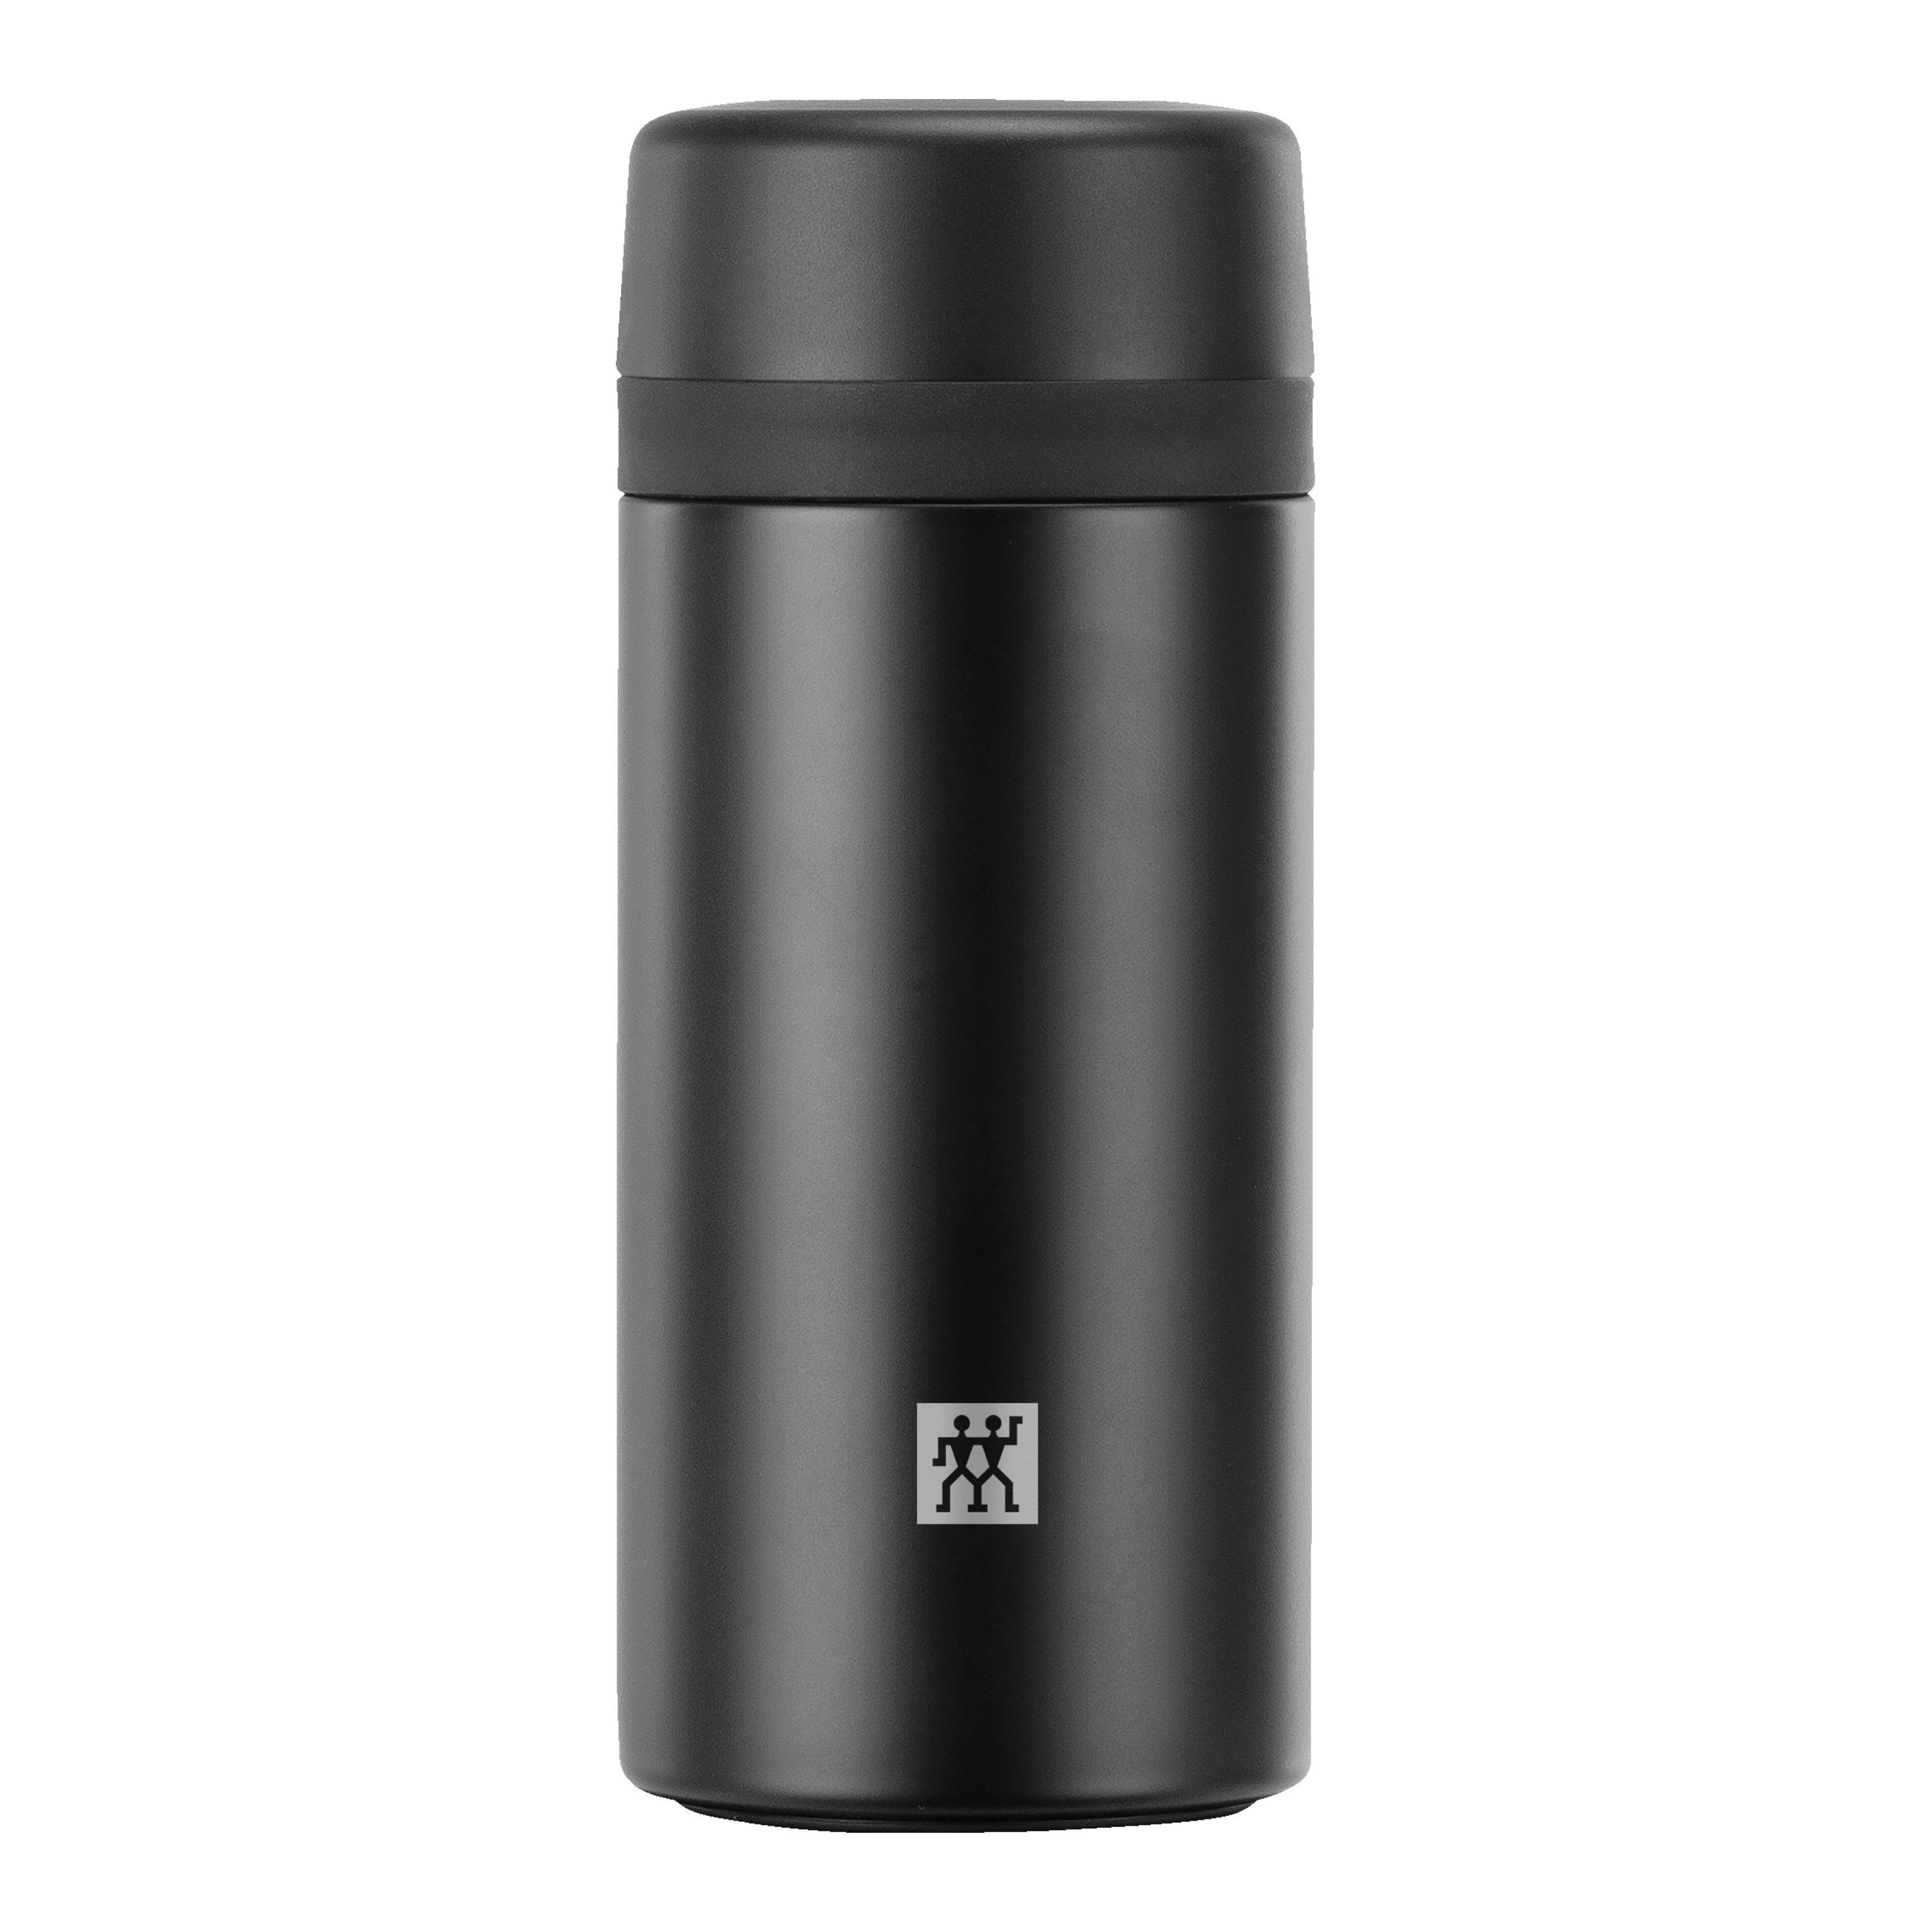 Infuse enjoy your tea on the go in our signature double-walled flask. 